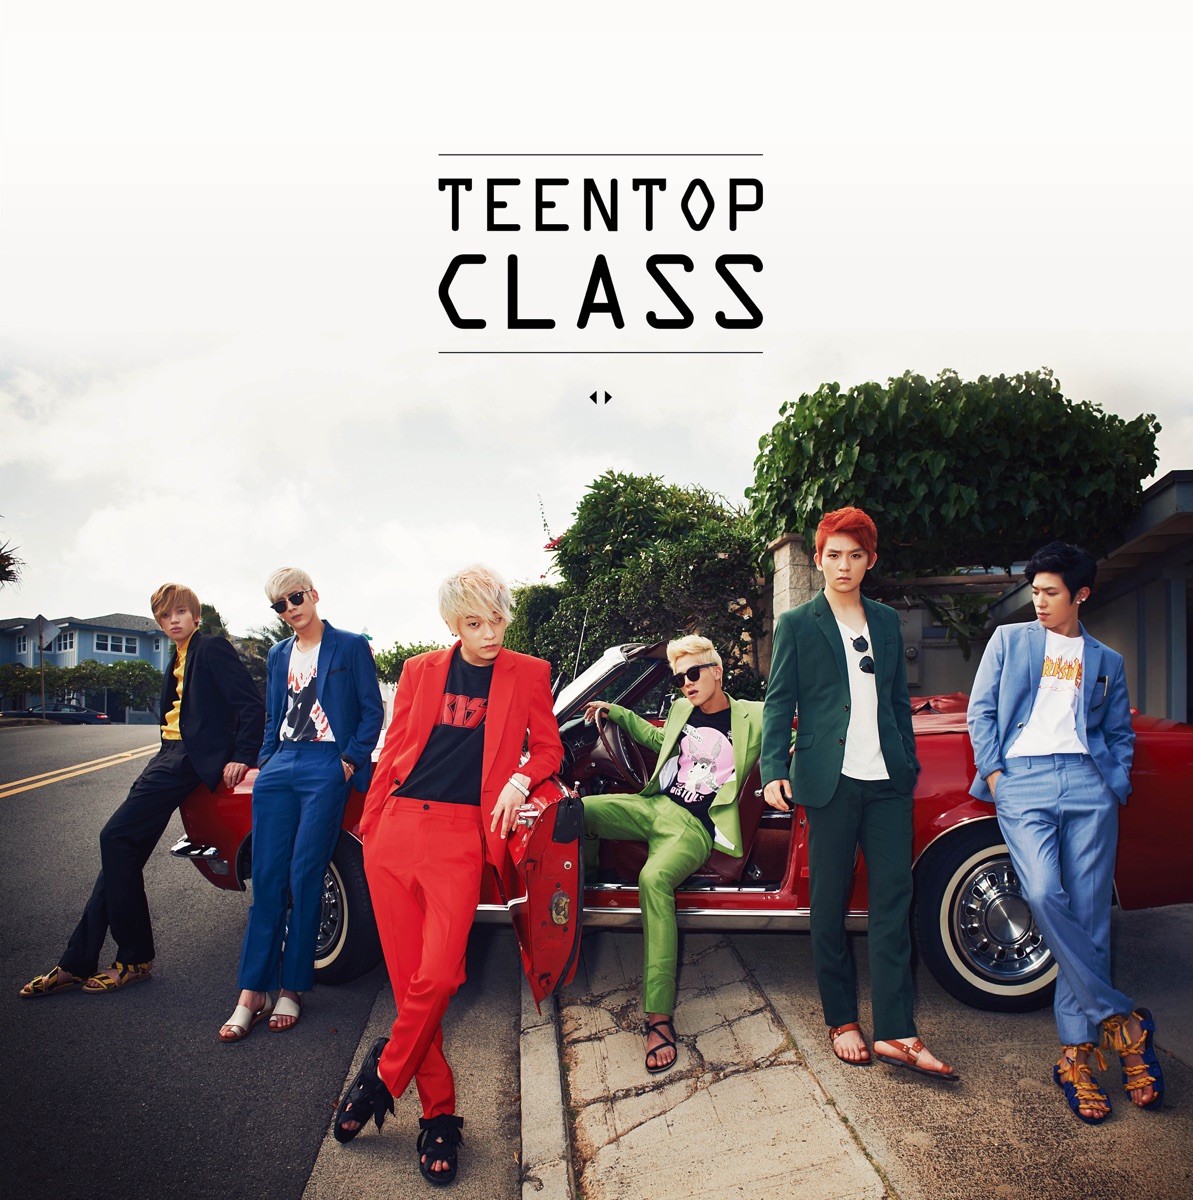 Artist - EP by TEEN TOP on Apple Music